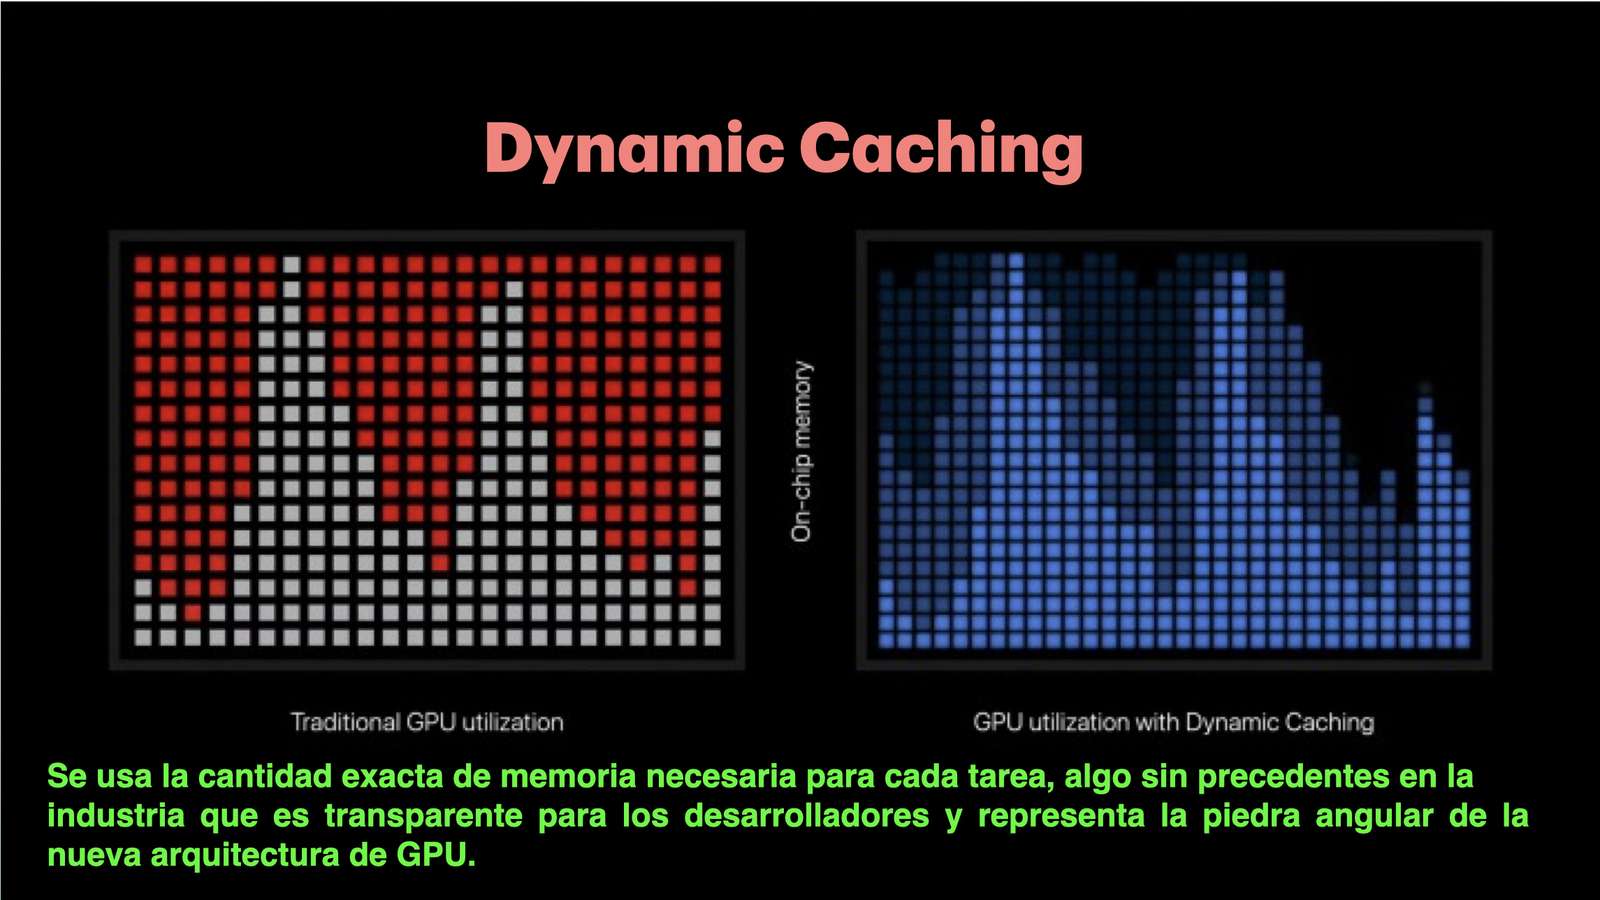 Dynamisches Caching Online-Puzzle